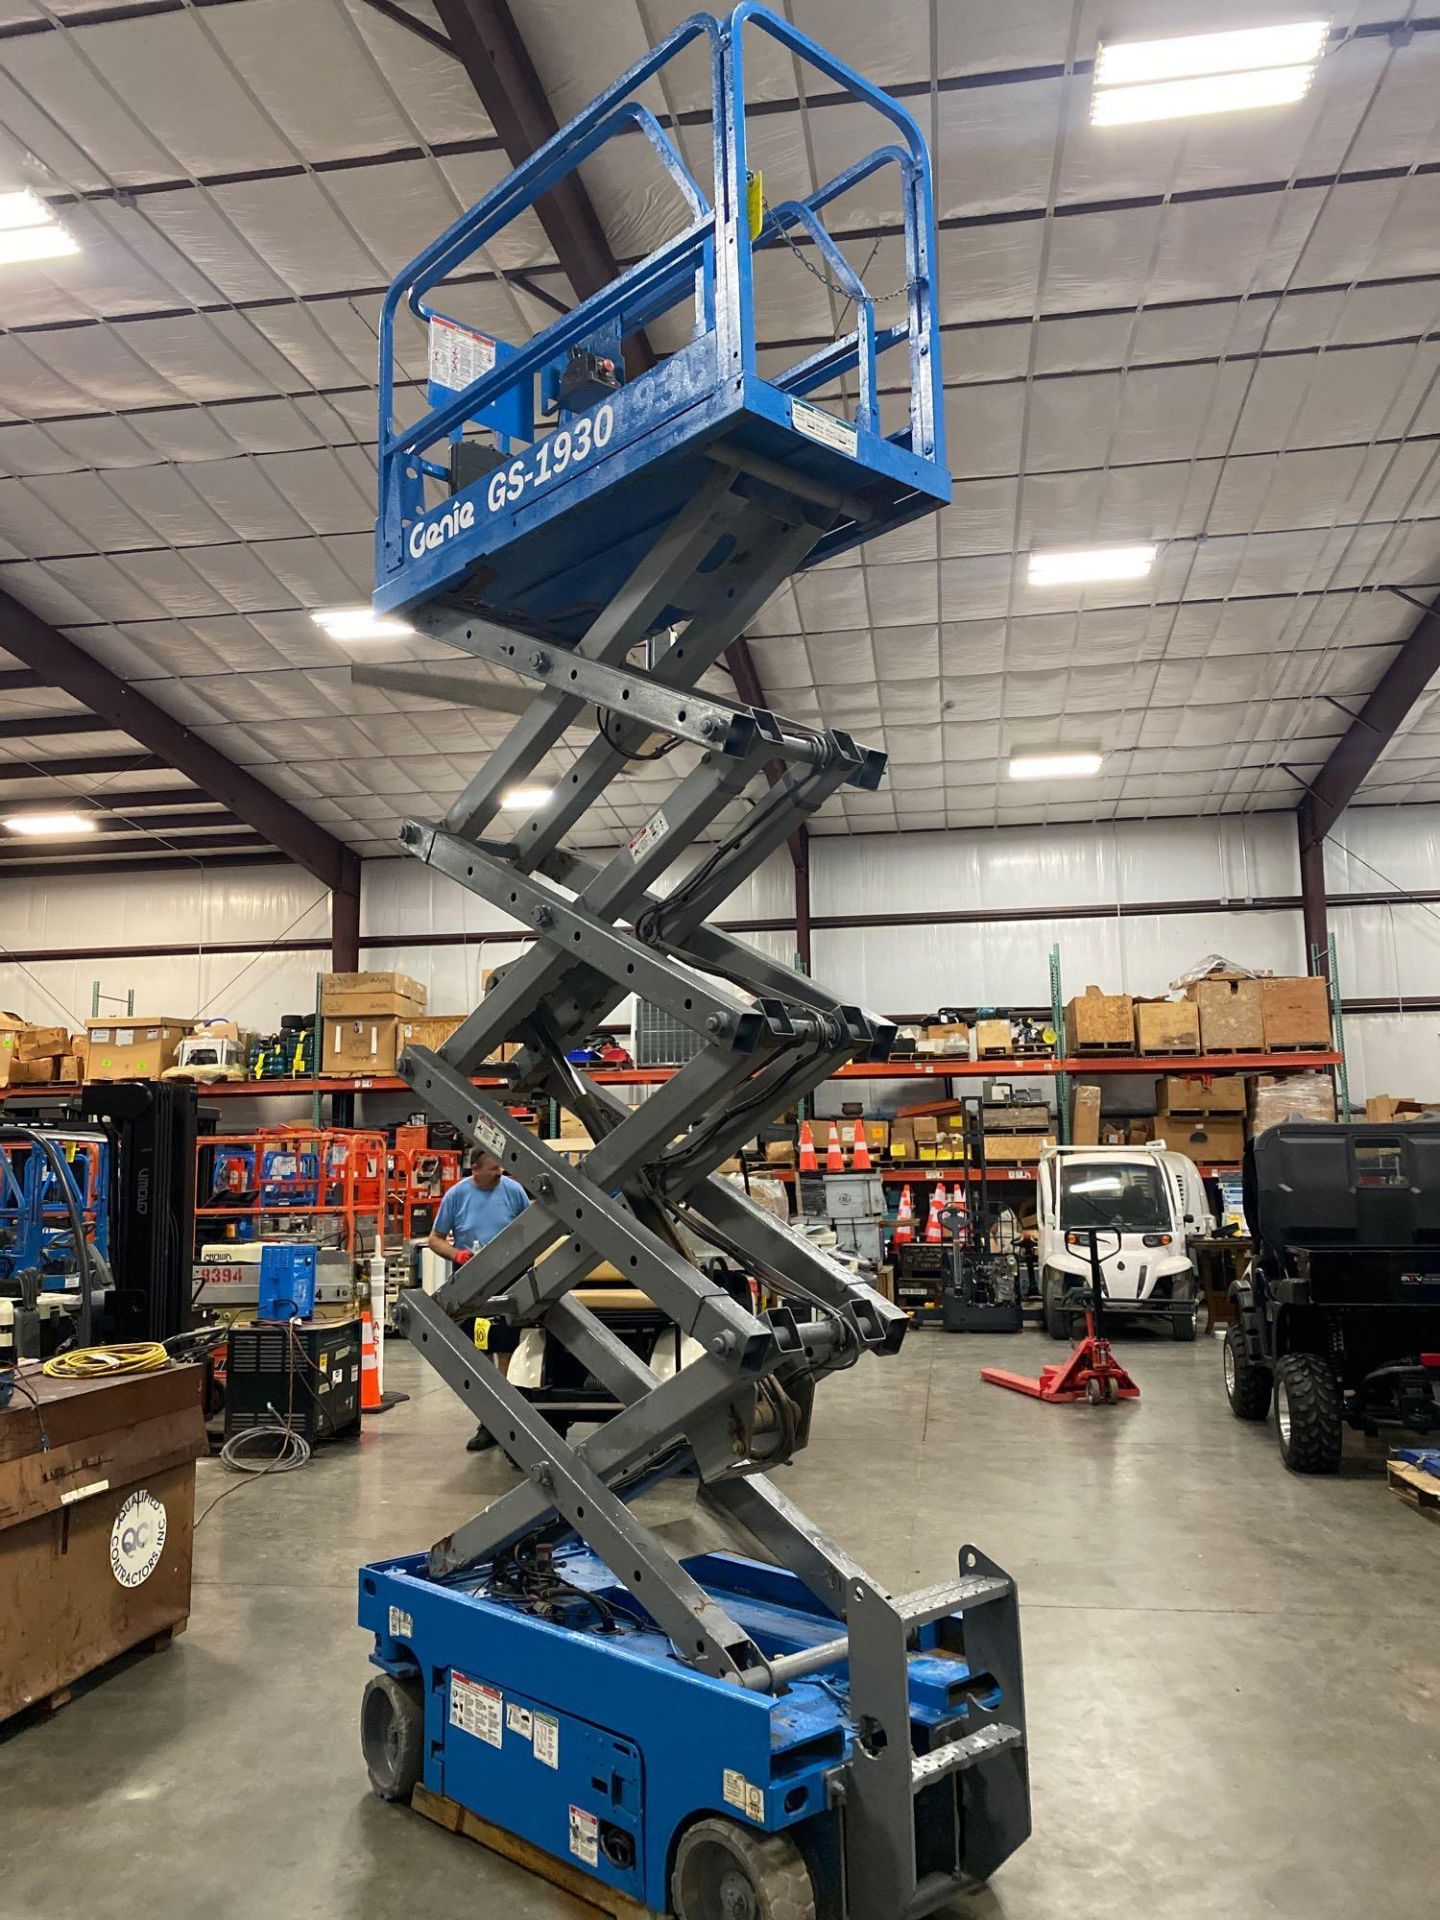 GENIE GS1930 SCISSOR LIFT, SELF PROPELLED, 19' PLATFORM HEIGHT, BUILT IN BATTERY CHARGER, SLIDE OUT - Image 2 of 10